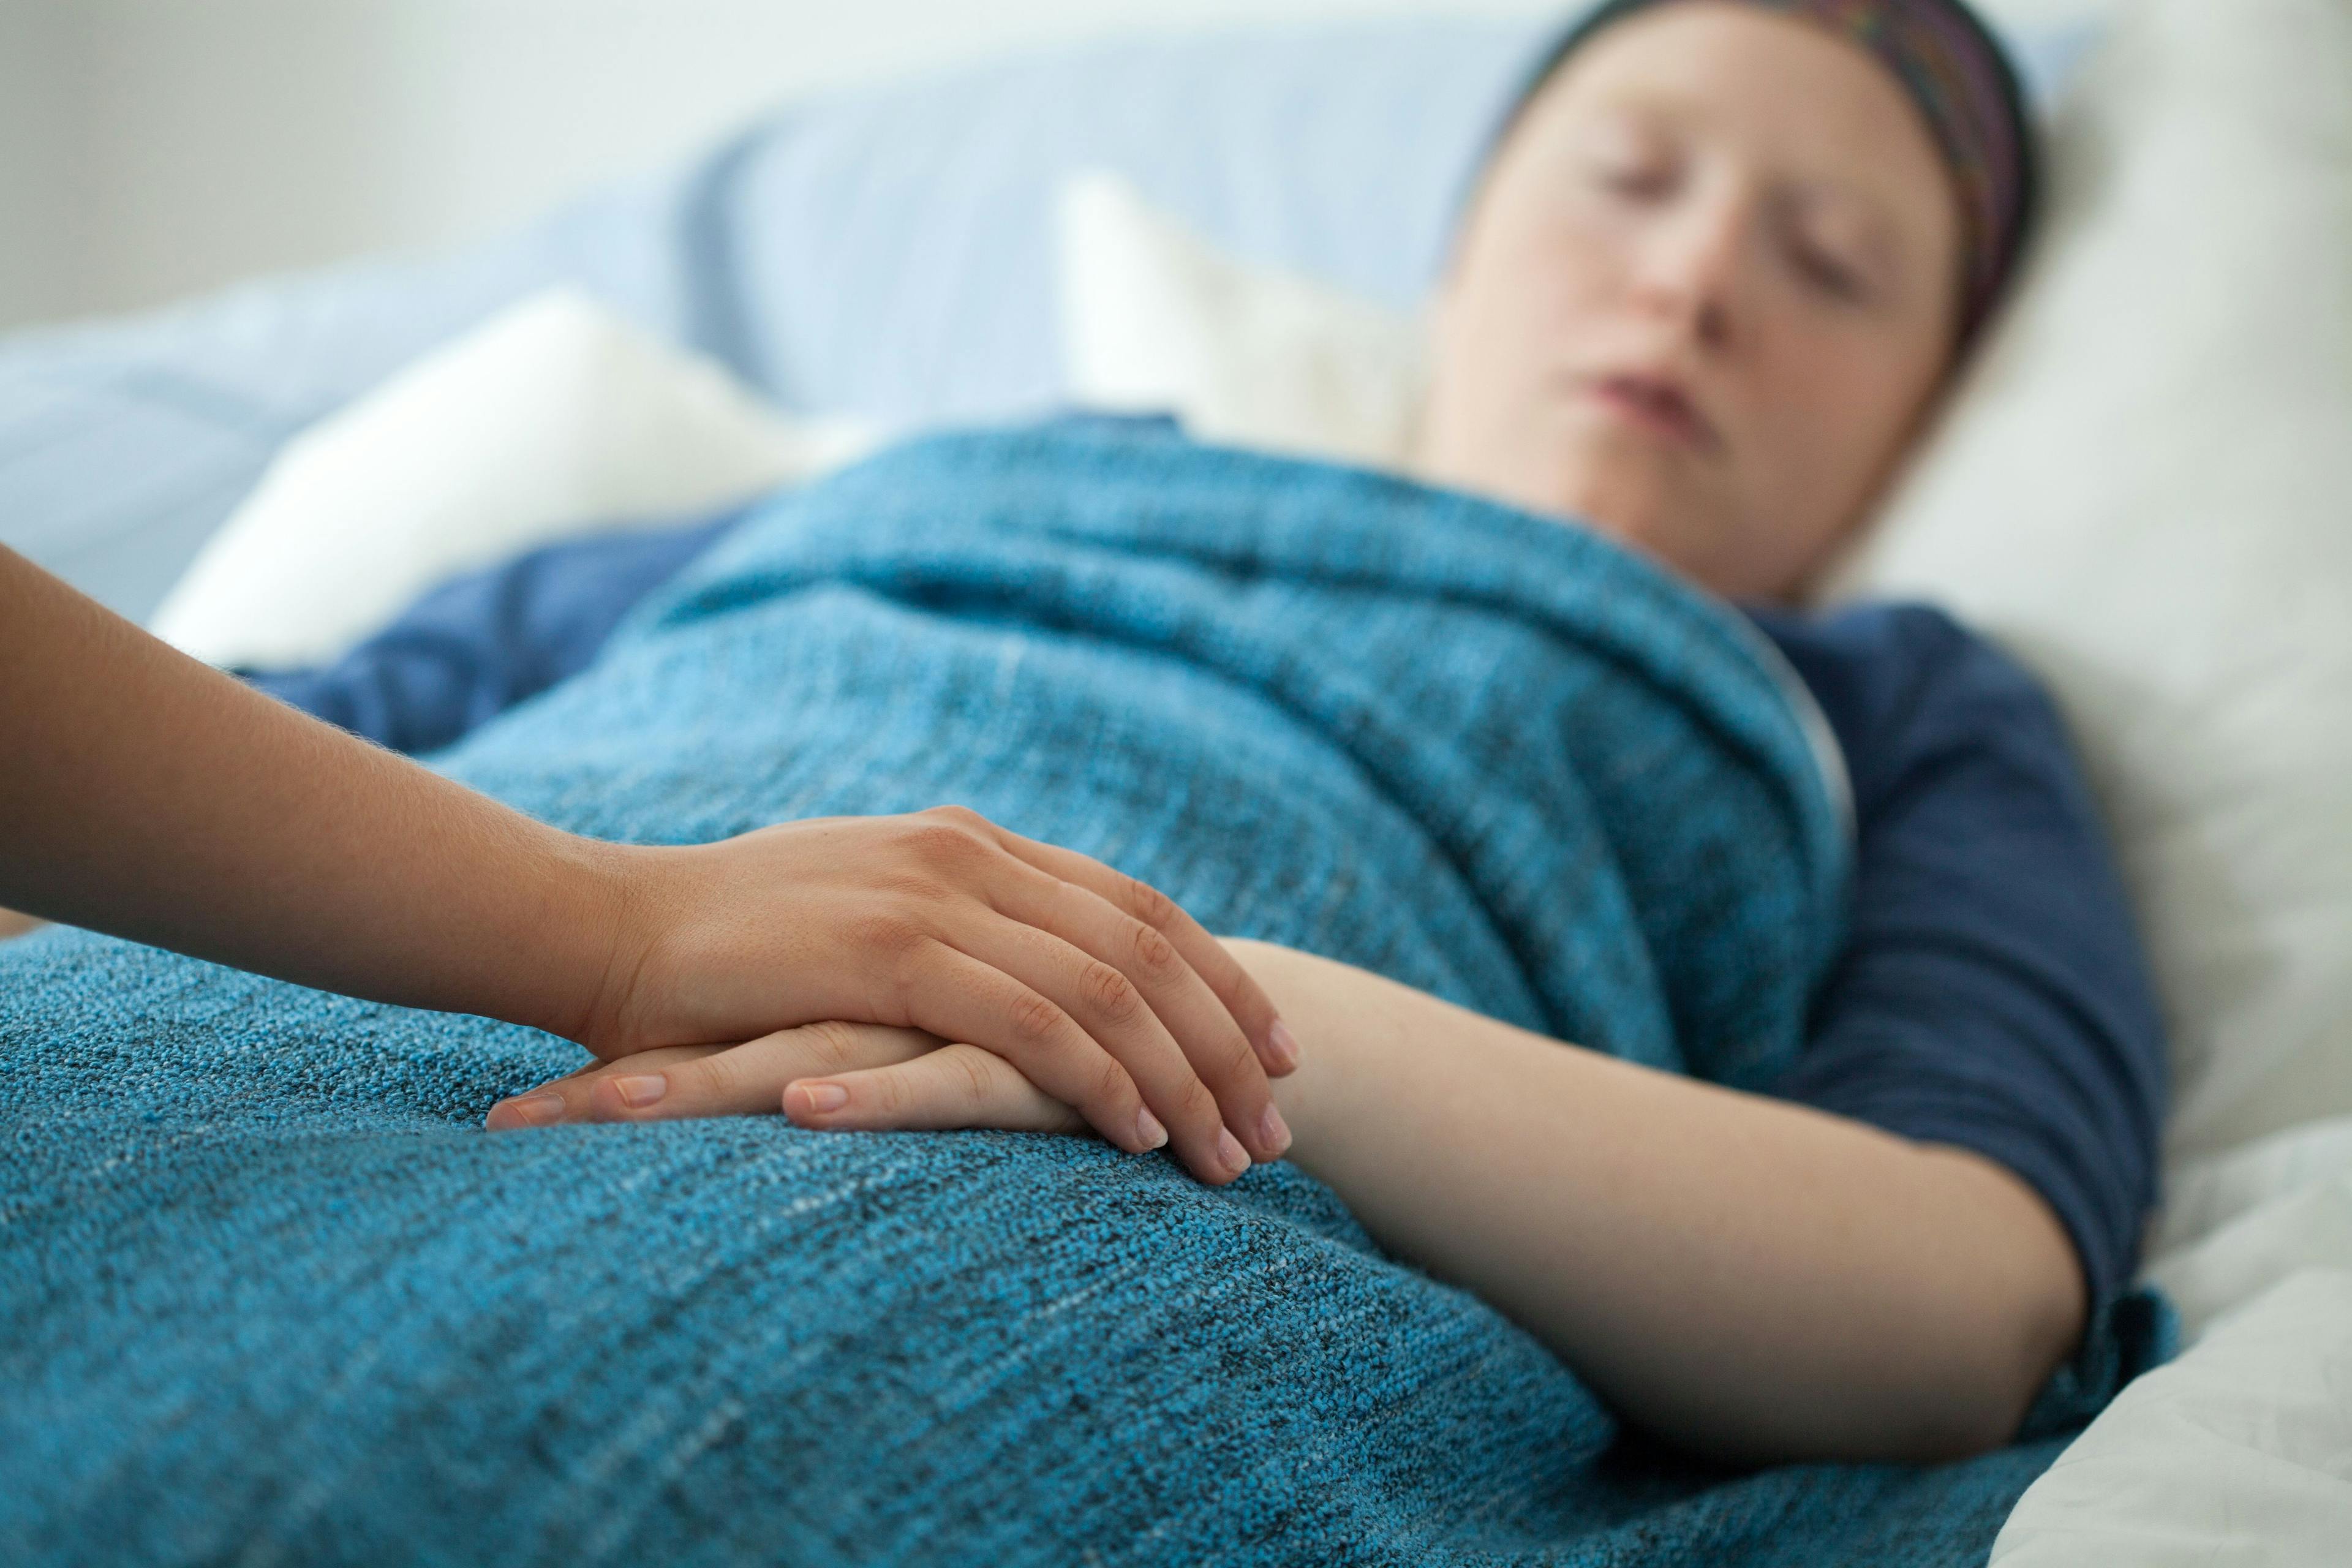 Greater Sleep Disturbance Associated With External Factors in Patients With GI Cancers